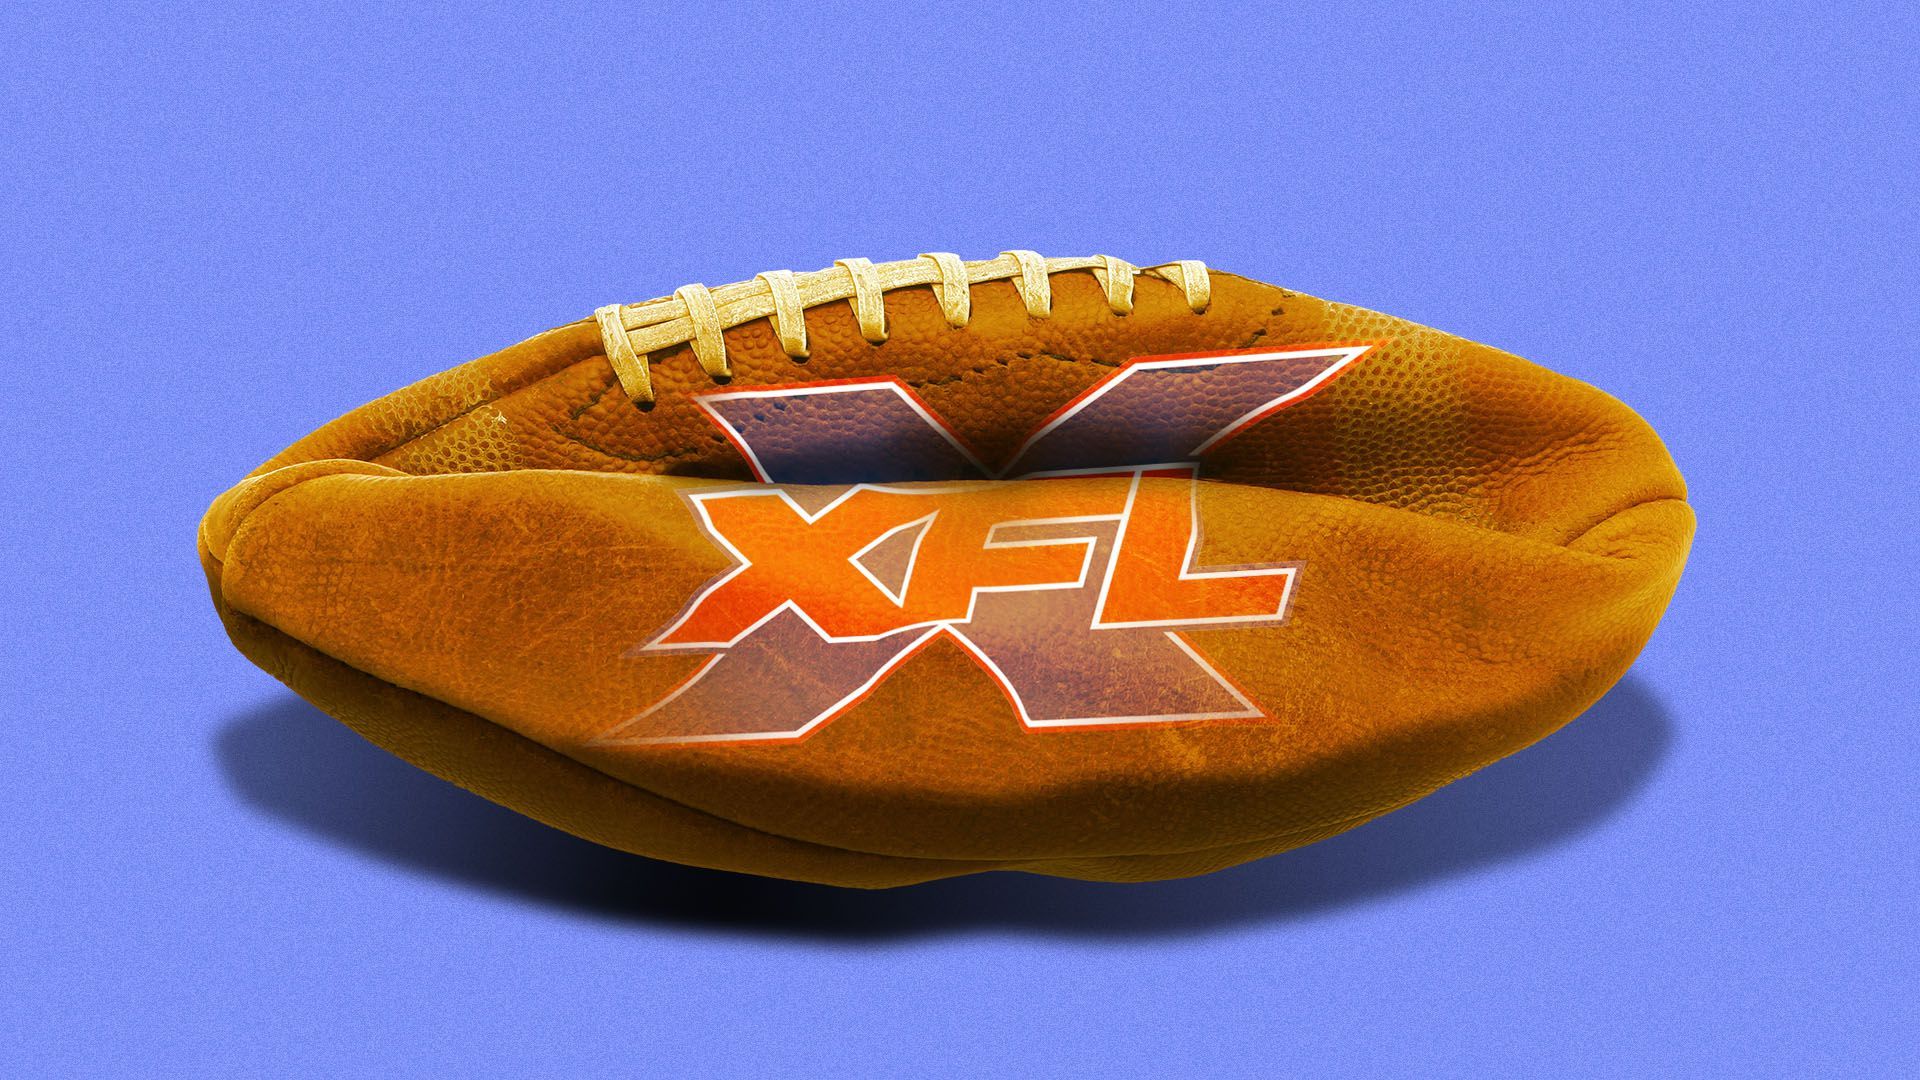 Illustration a deflated football with the XFL logo on it